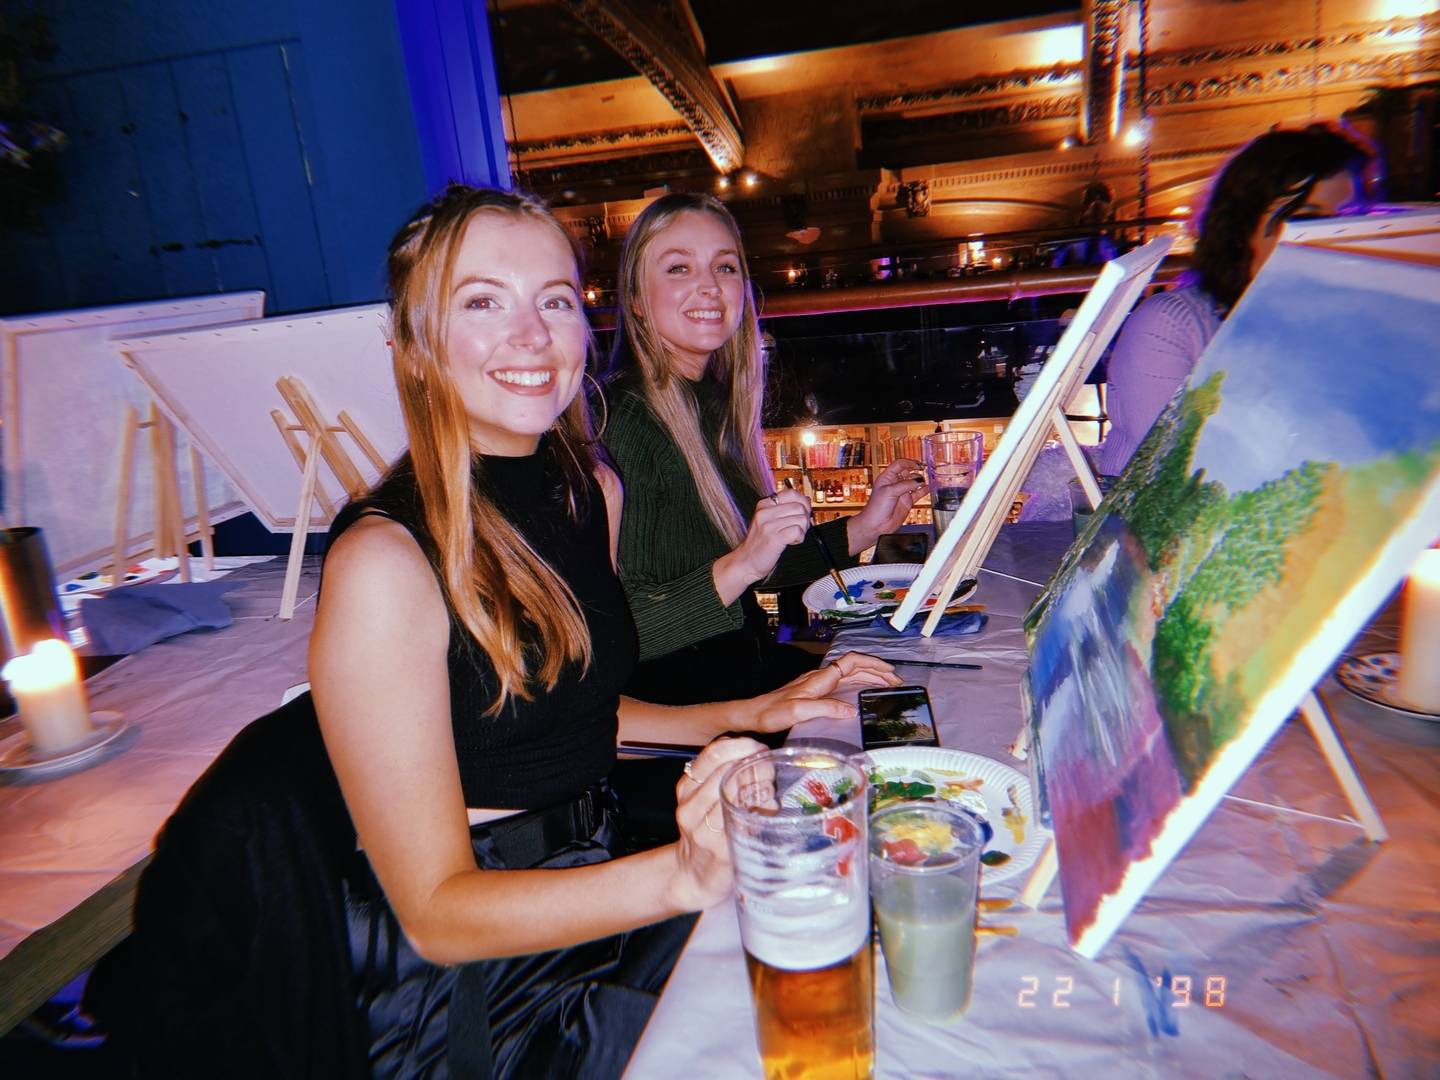 Girls smiling and painting